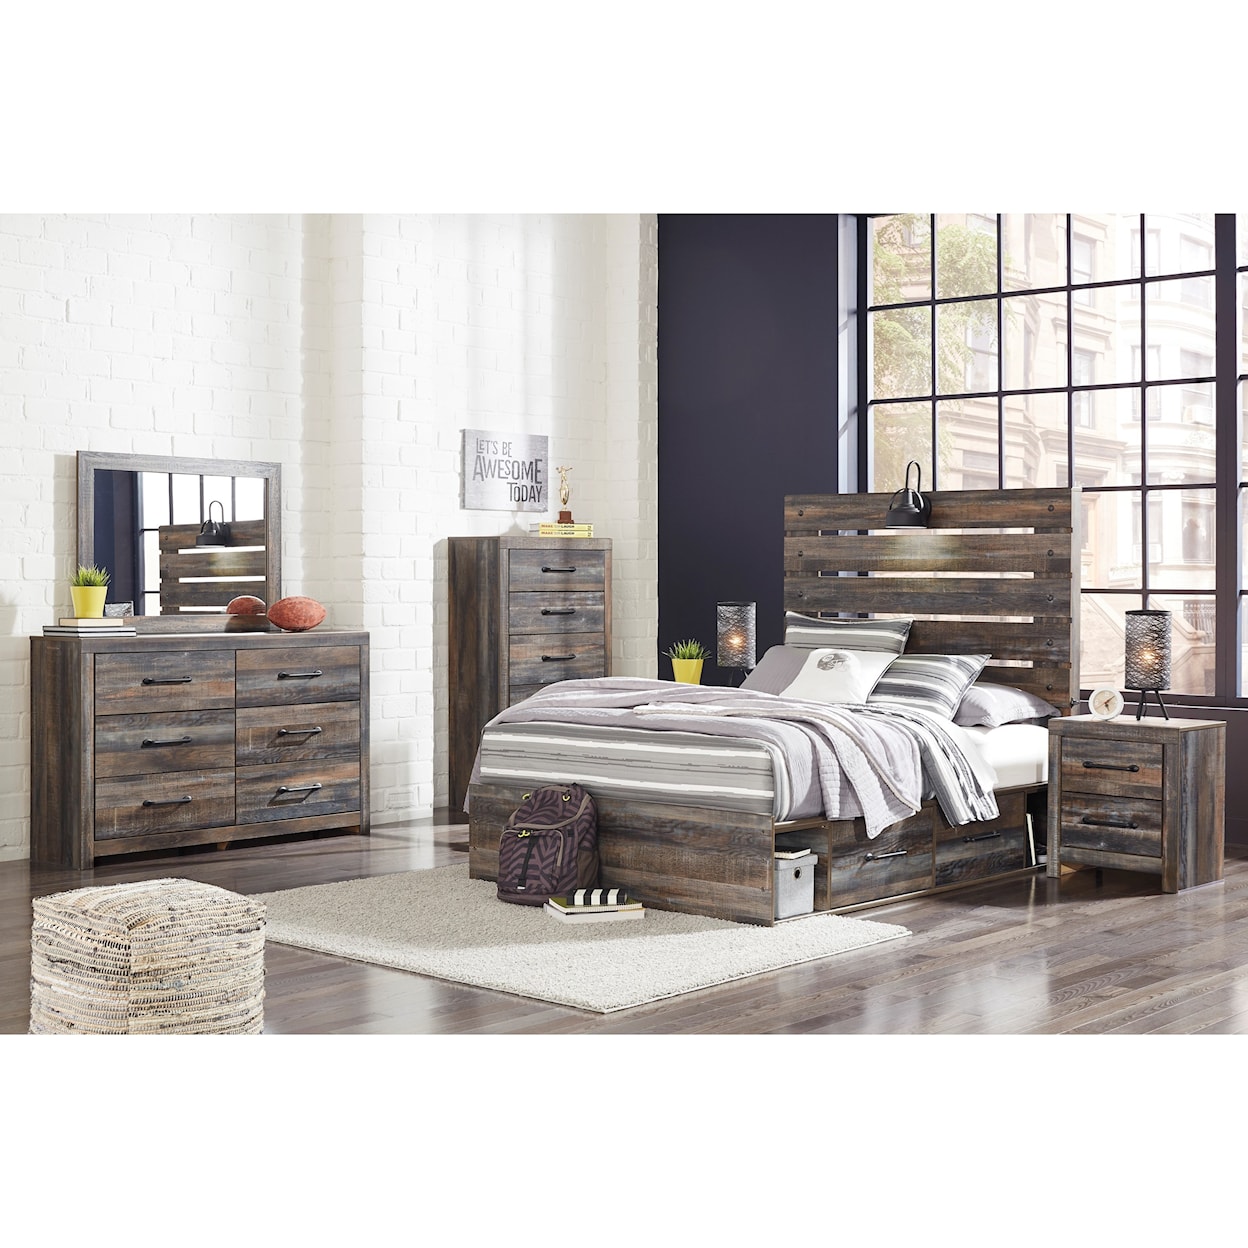 Signature Dalton Full Storage Bed with 2 Drawers